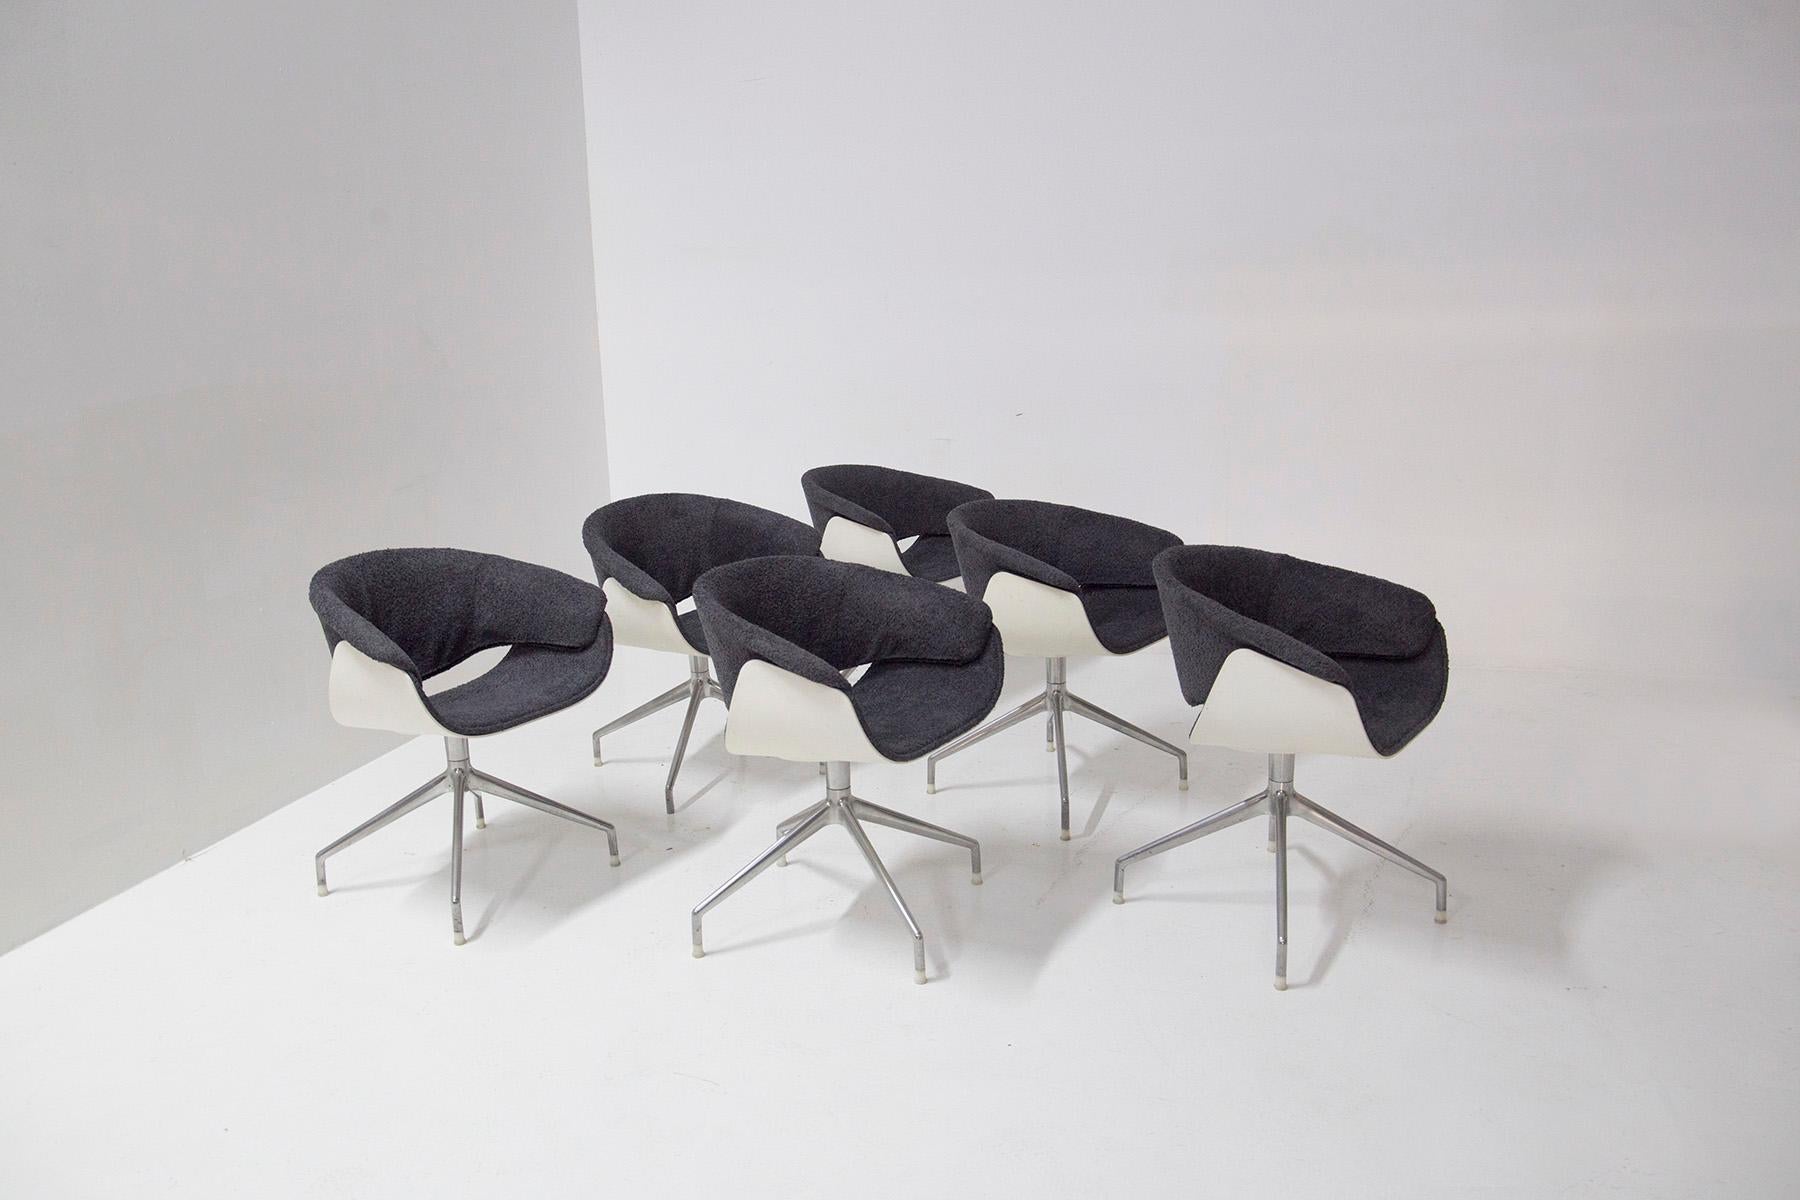 B&B Italia's Sina chairs, designed by Uwe Fischer in 1990 and still sold as one of the best vintage chairs of the 1990s. Beautifully constructed with two curved shapes that combine to create an elegant compact chair for a dining room or office. Each